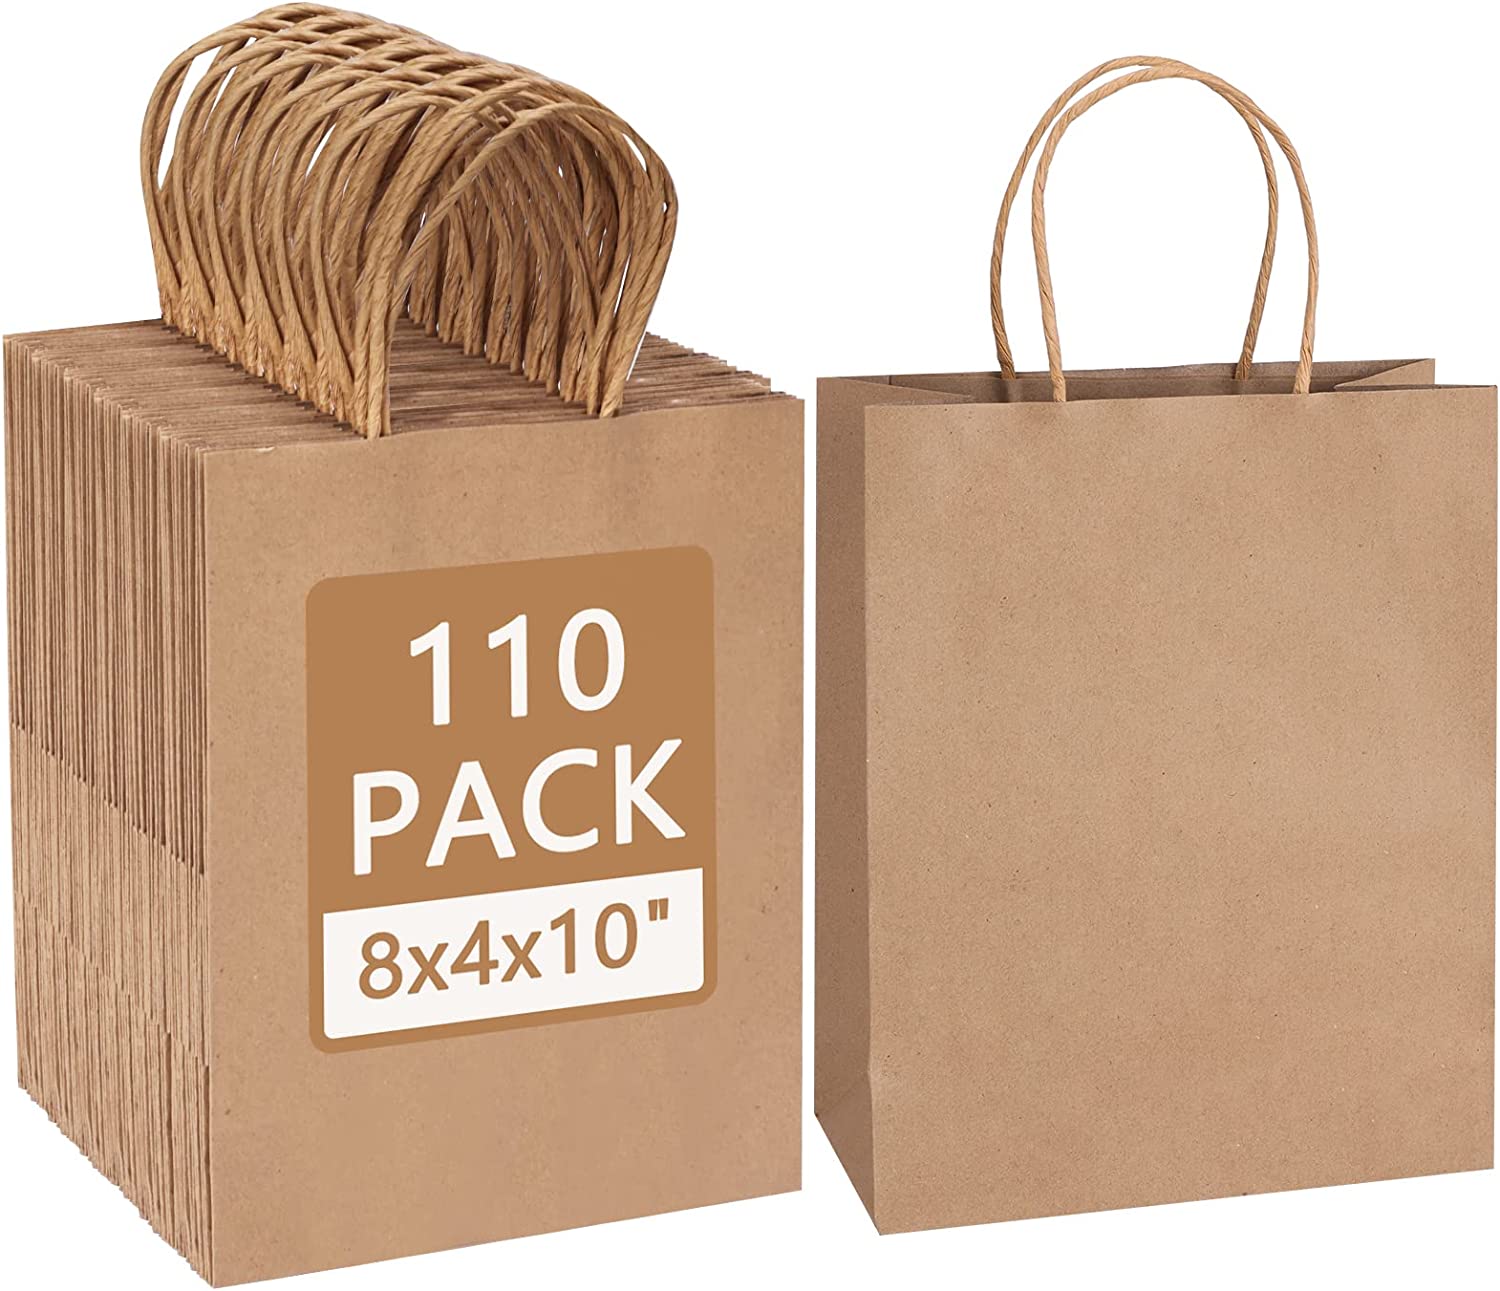 Brown Paper Bags with Handles Bulks 13 X 7 X 17 [50 Bags]. Ideal for  Shopping, Packaging, Retail, Pa…See more Brown Paper Bags with Handles  Bulks 13 X